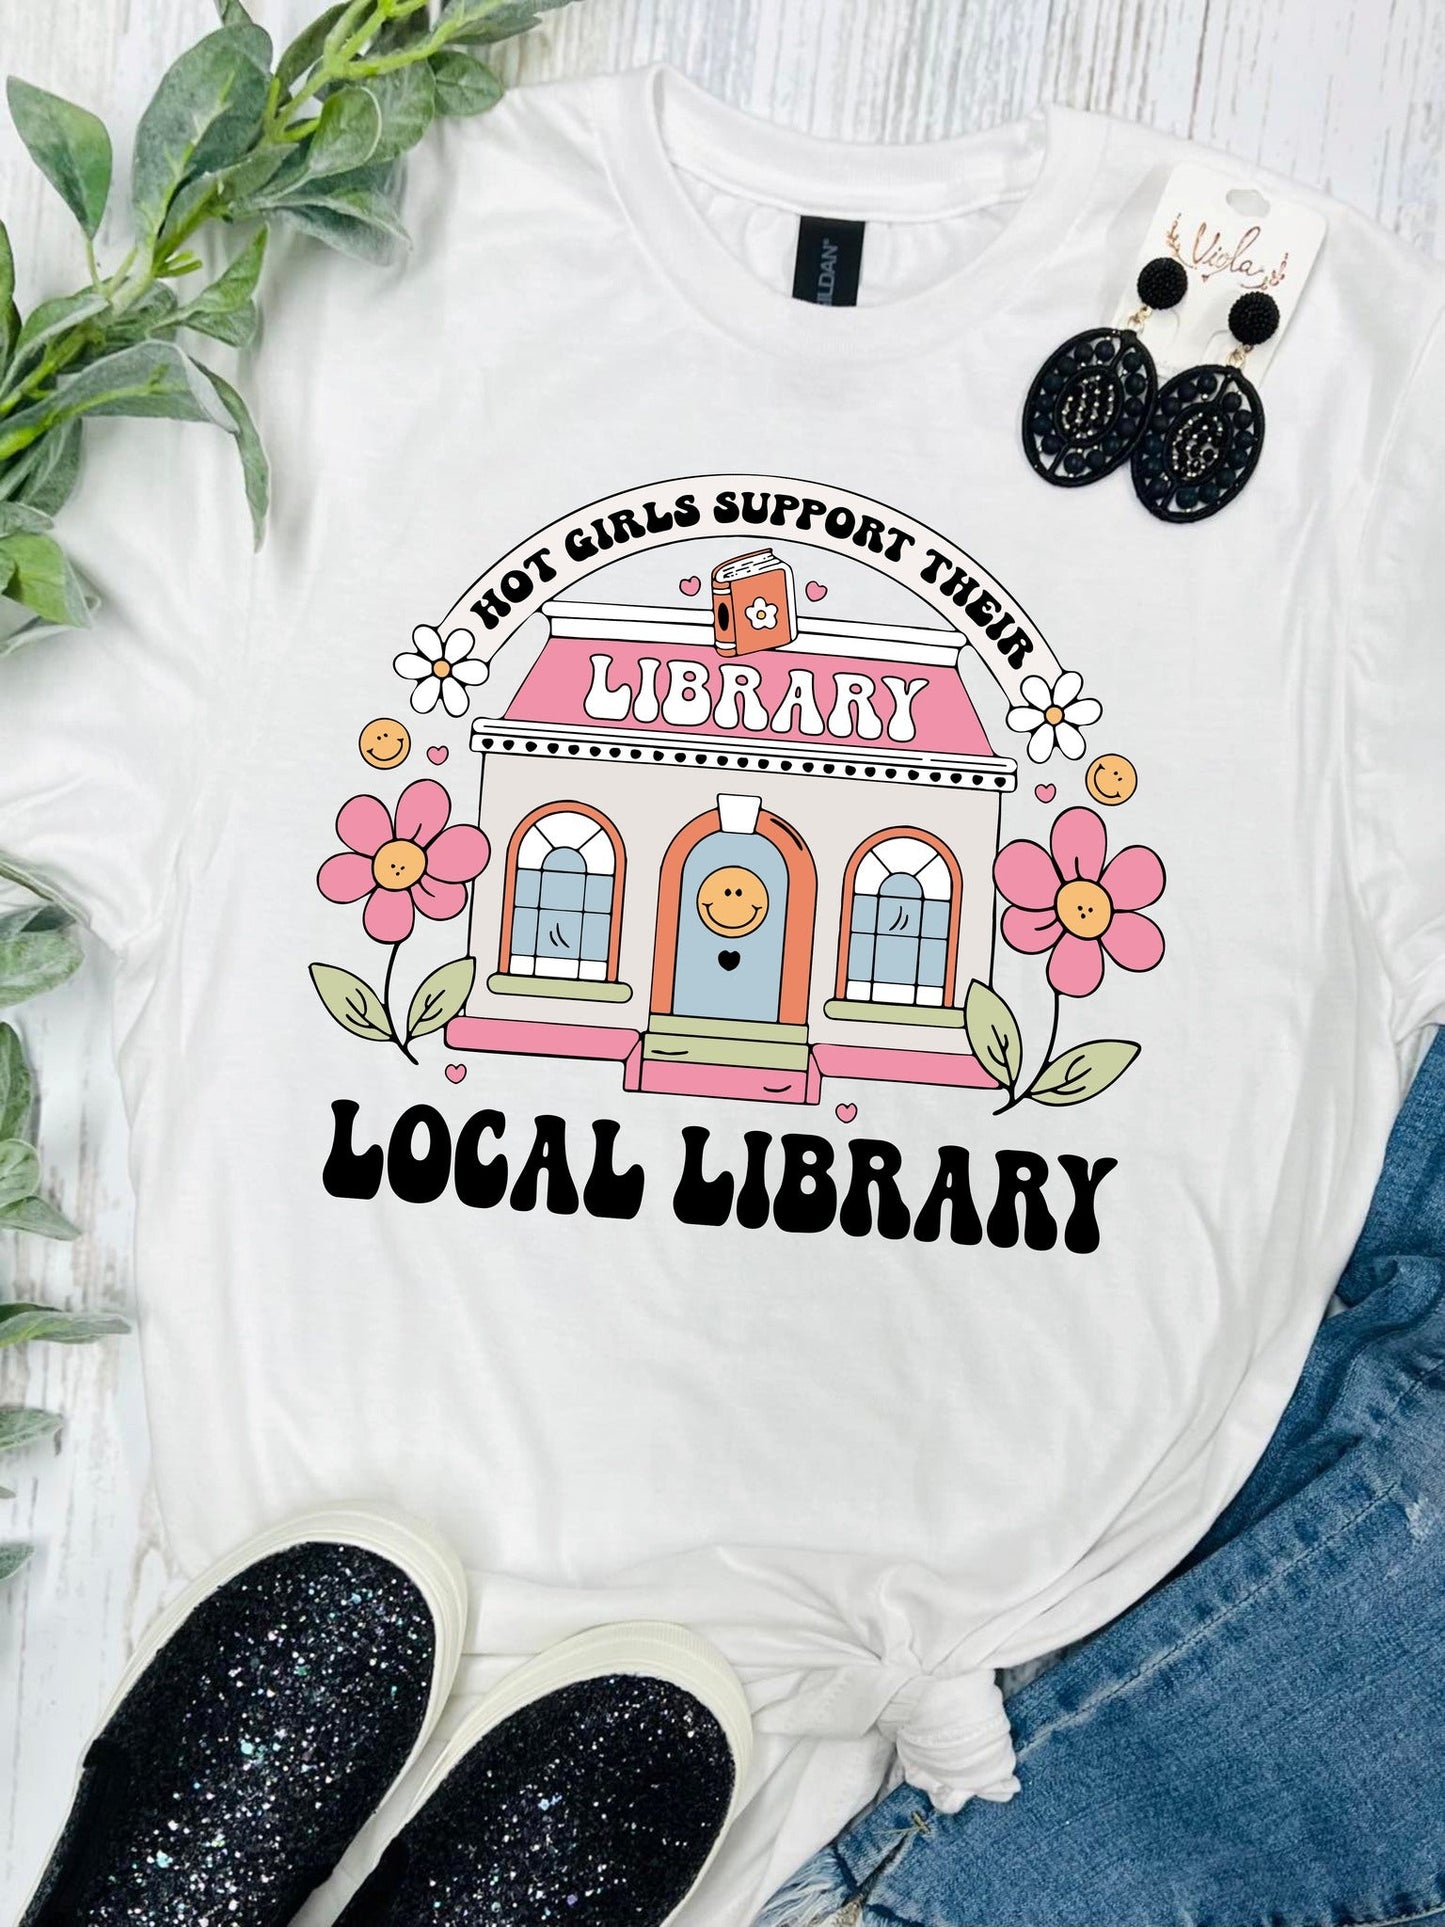 Hot Girls Support Their Local Library White Tee